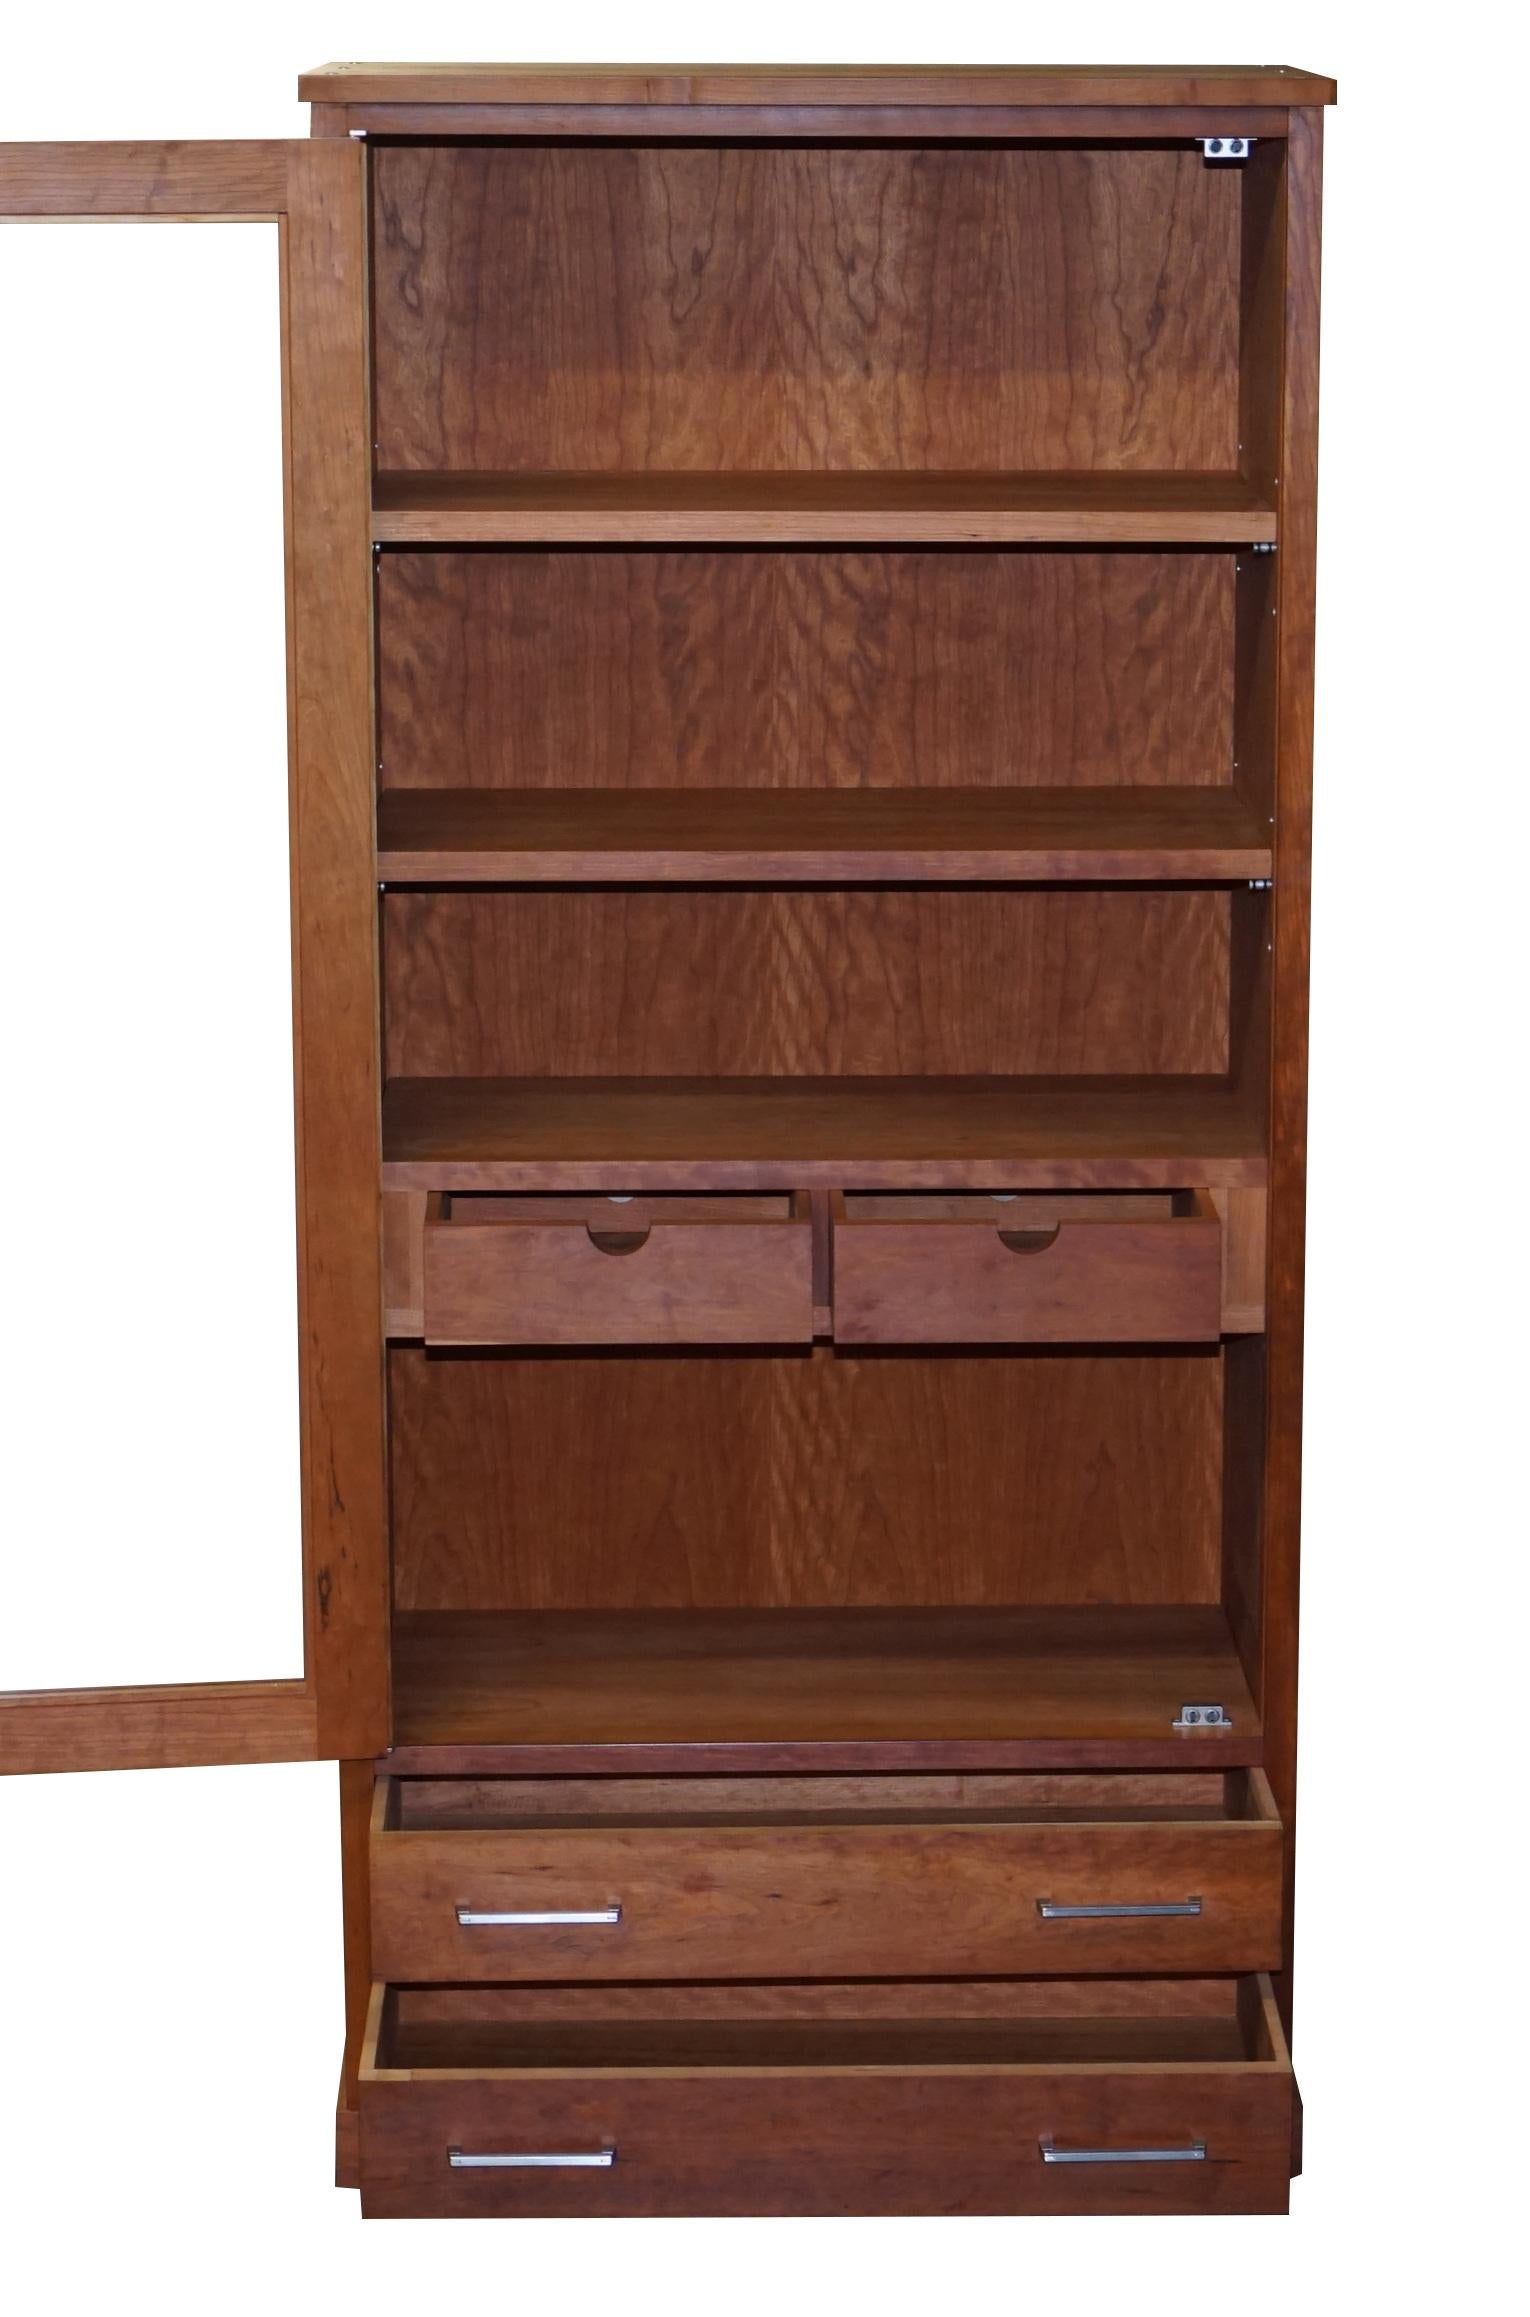 SOLID AMERICAN BLACK CHERRY WOOD HAND MADE IN ITALY RIVA 1920 BOOKCASE CUPBOARd 2